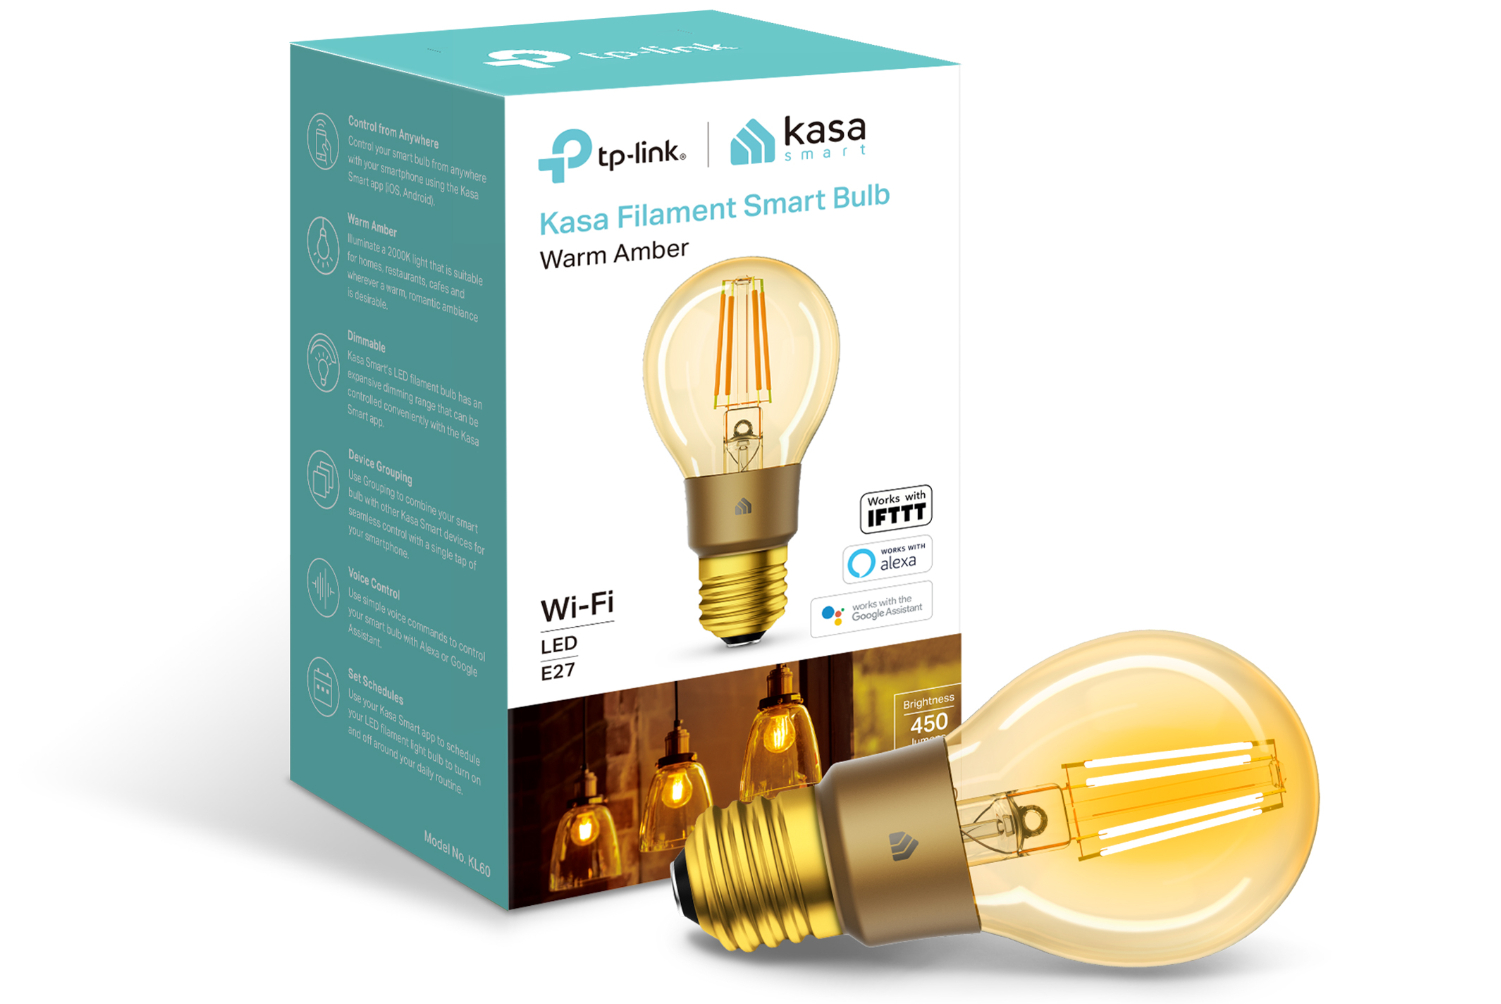 kasa smart lights are ready to party or give your home a vintage classic glow 19 kl60 packaging pr images  1